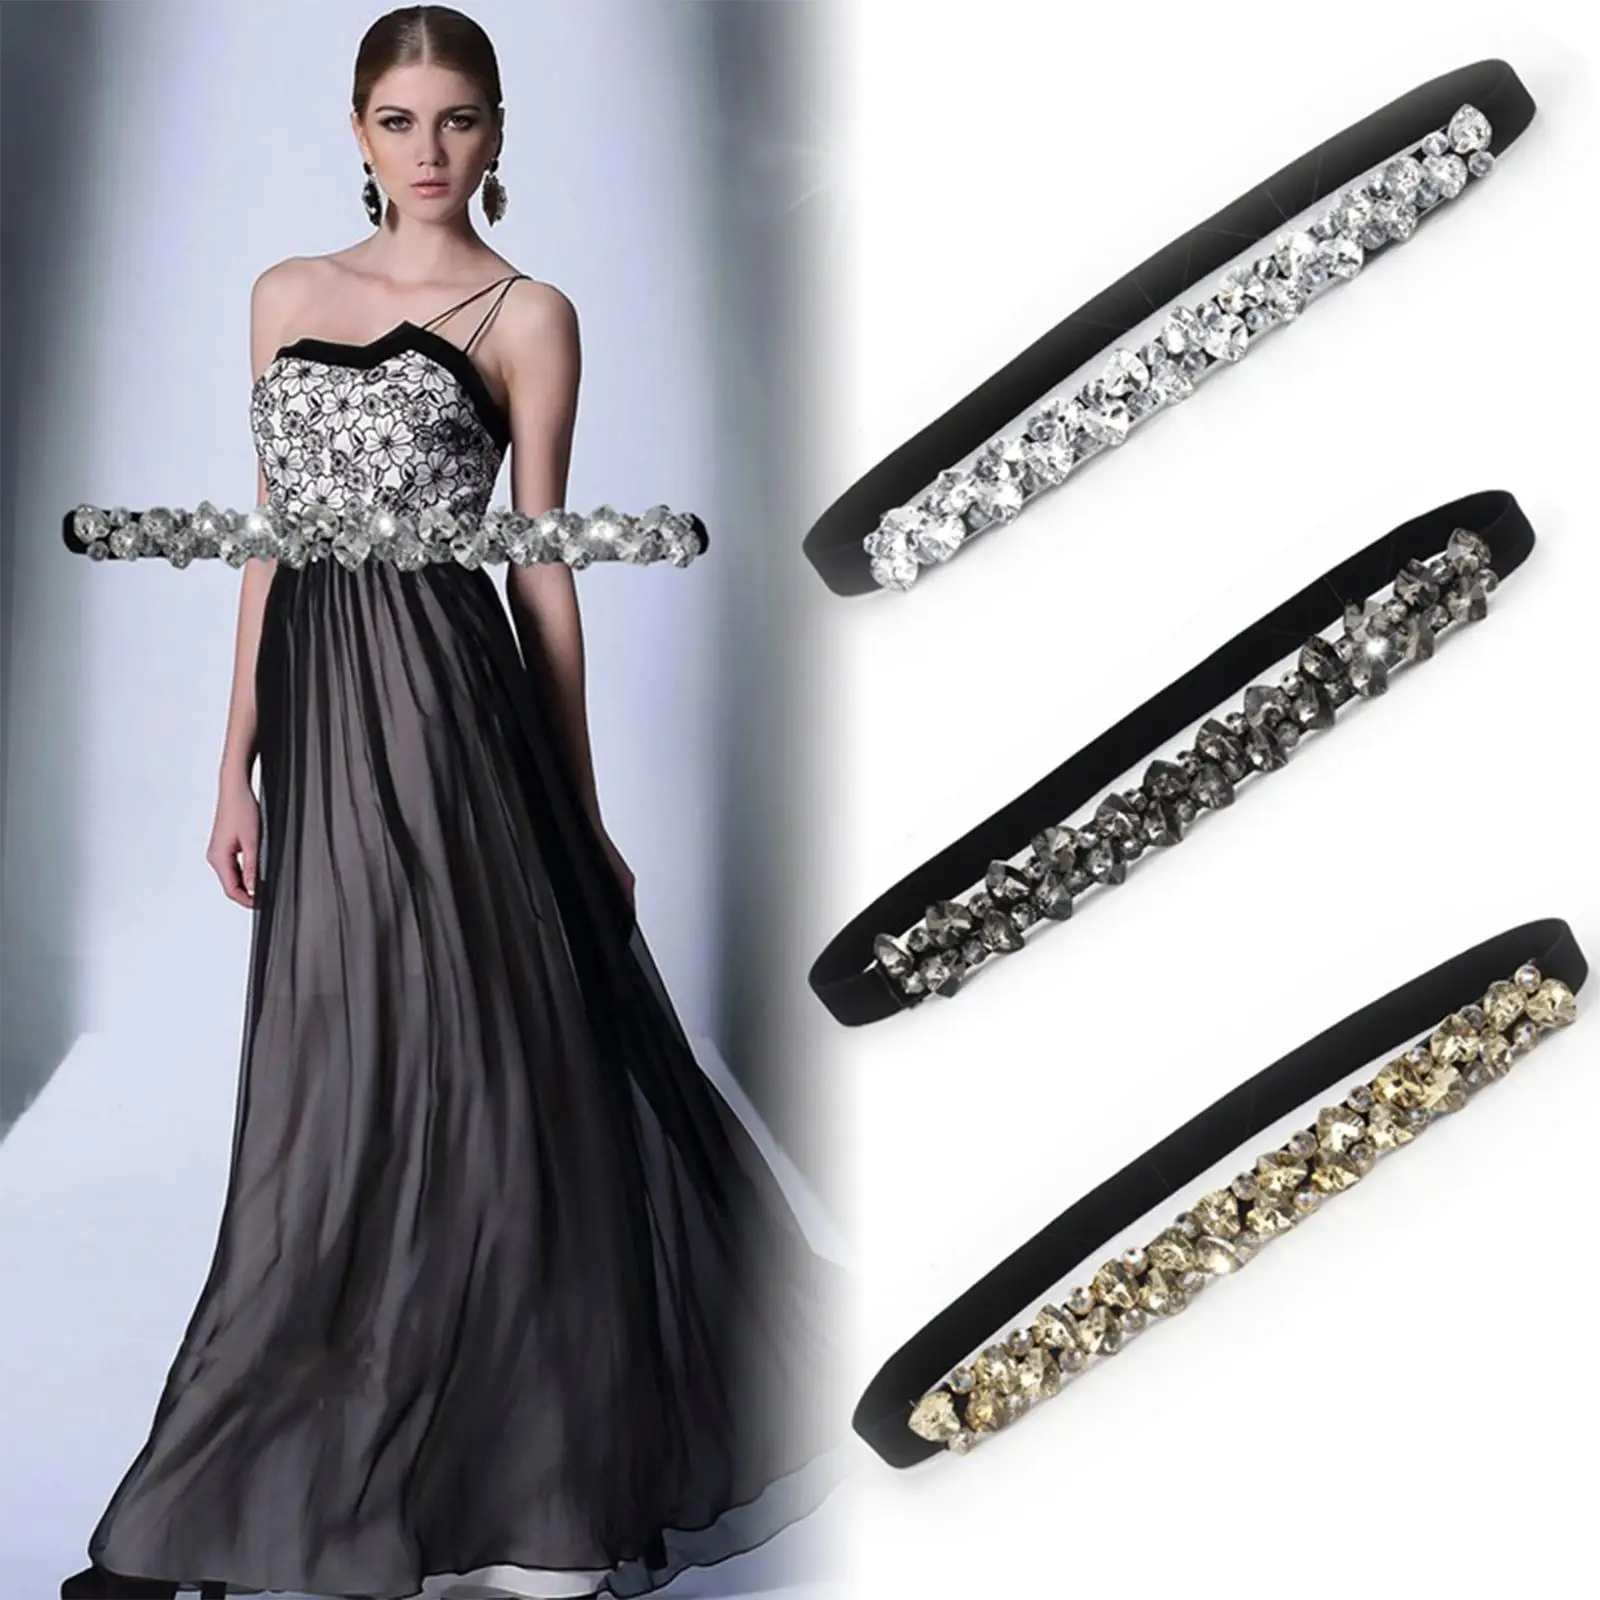 Waistband with Rhinestones Dress accesorios Fashion Bridal Sashes for Wedding Formal Occasions Dresses Proms Birthday Parties